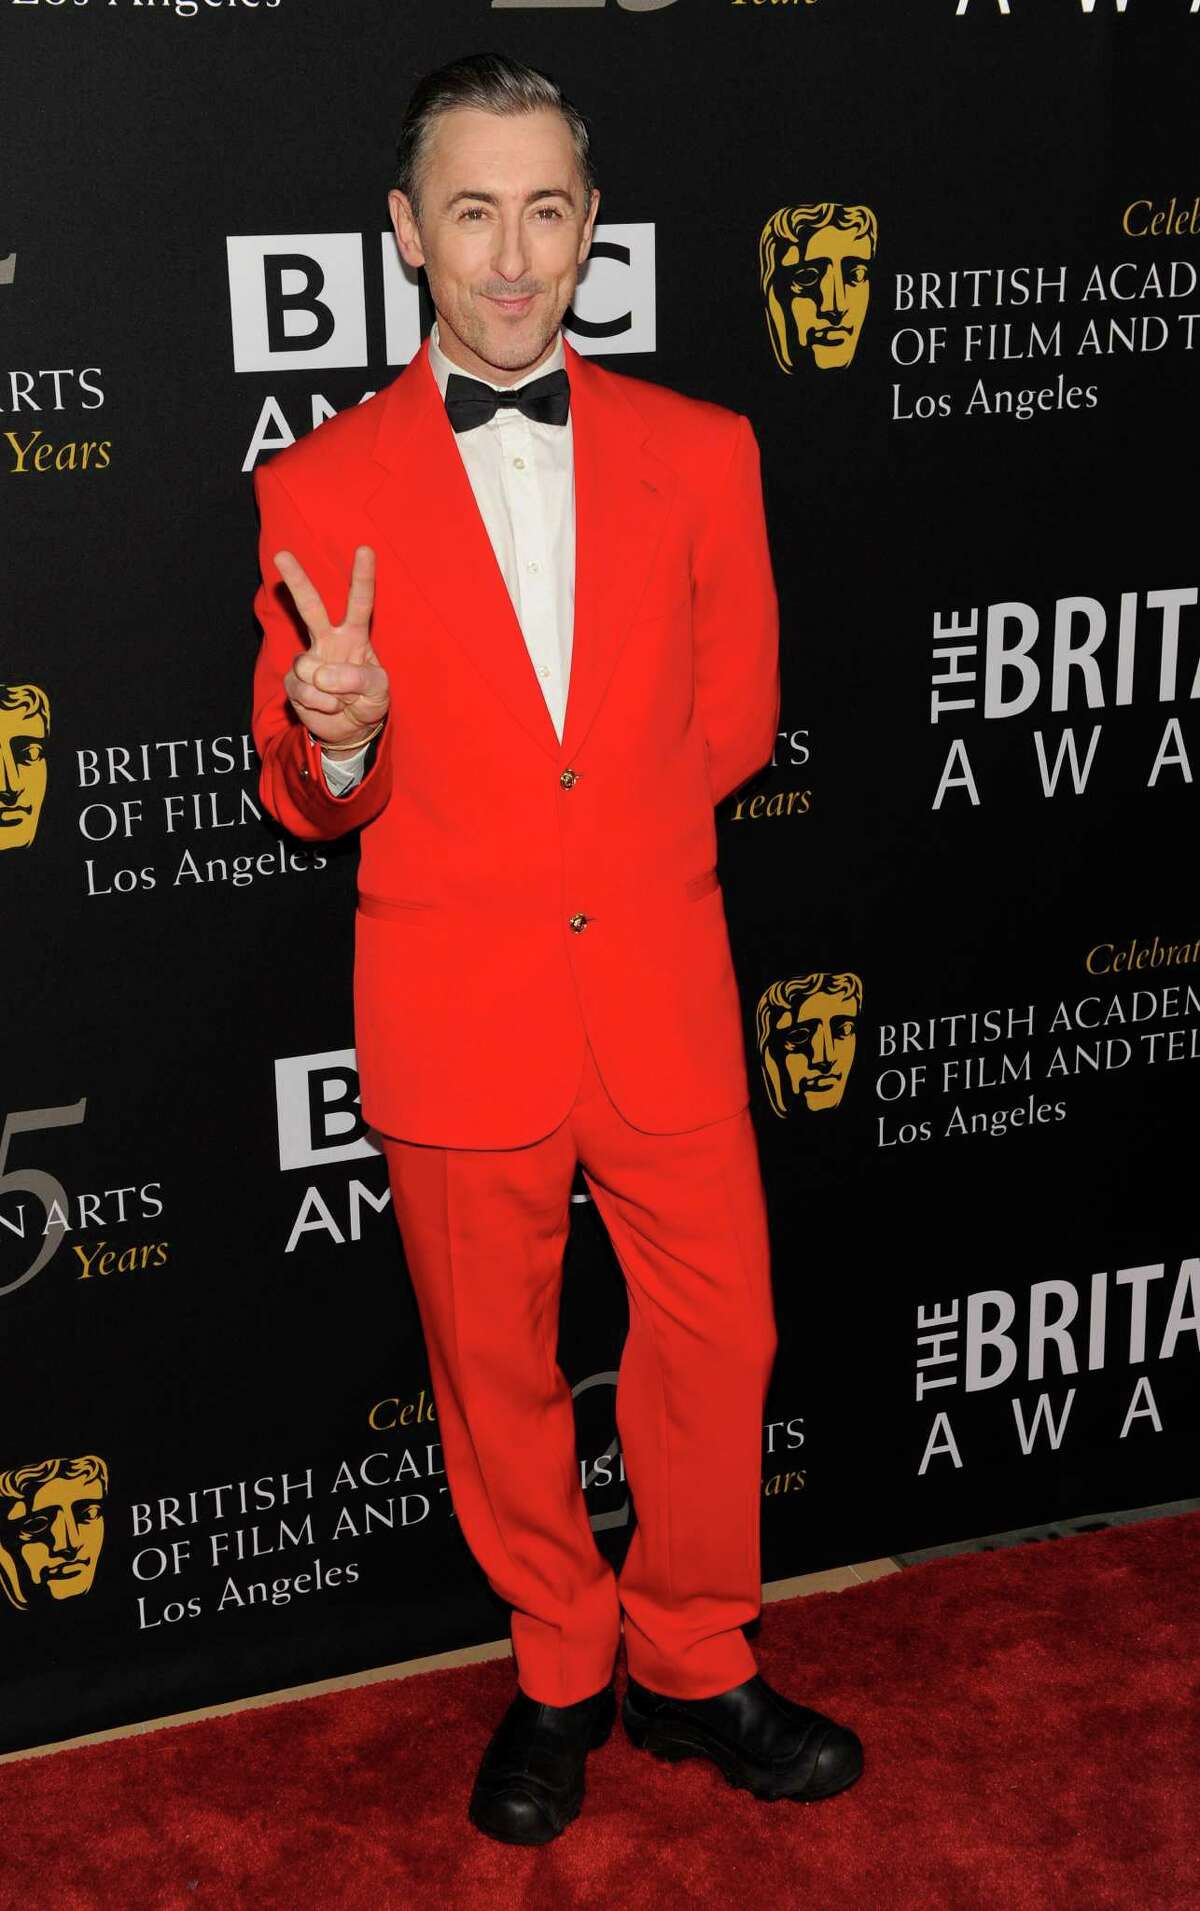 Host Alan Cumming poses at the BAFTA Los Angeles 2012 Britannia Awards at the Beverly Hilton Hotel on Wednesday, Nov. 7, 2012, in Beverly Hills, Calif. (Photo by Chris Pizzello/Invision/AP)